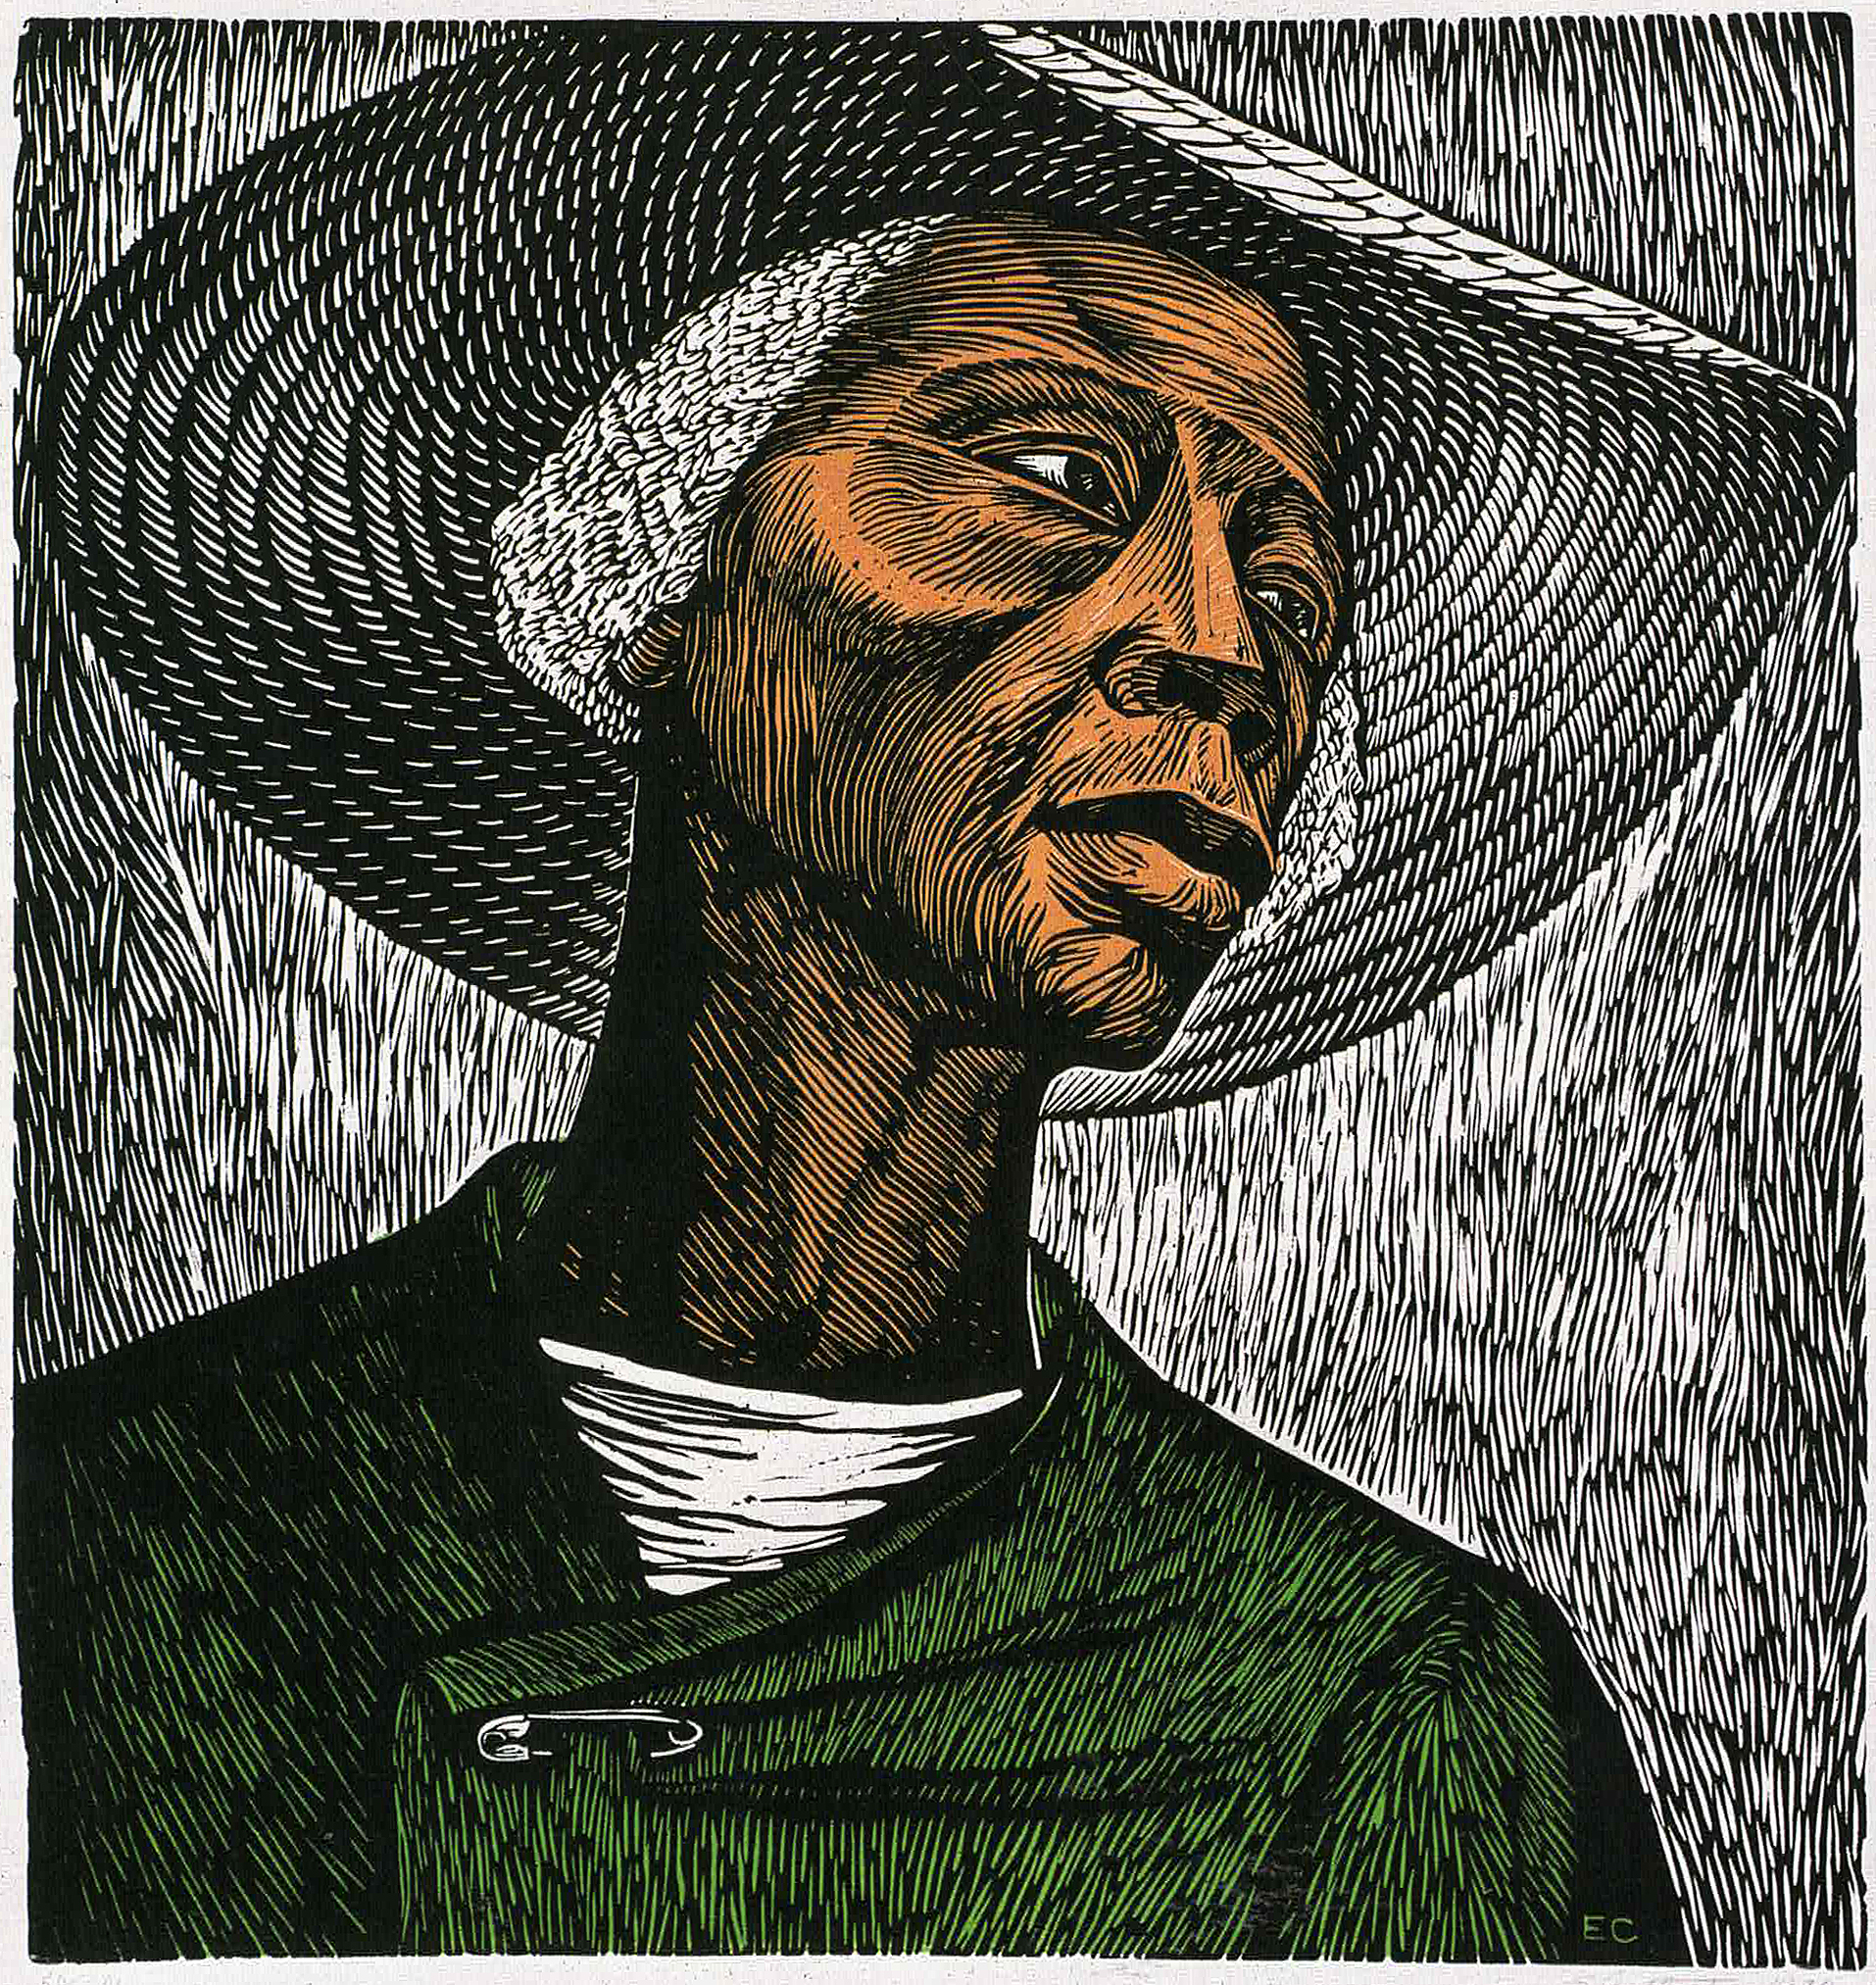 A Woodblock Print By The Sculptor And Artist Elizabeth Catlett.